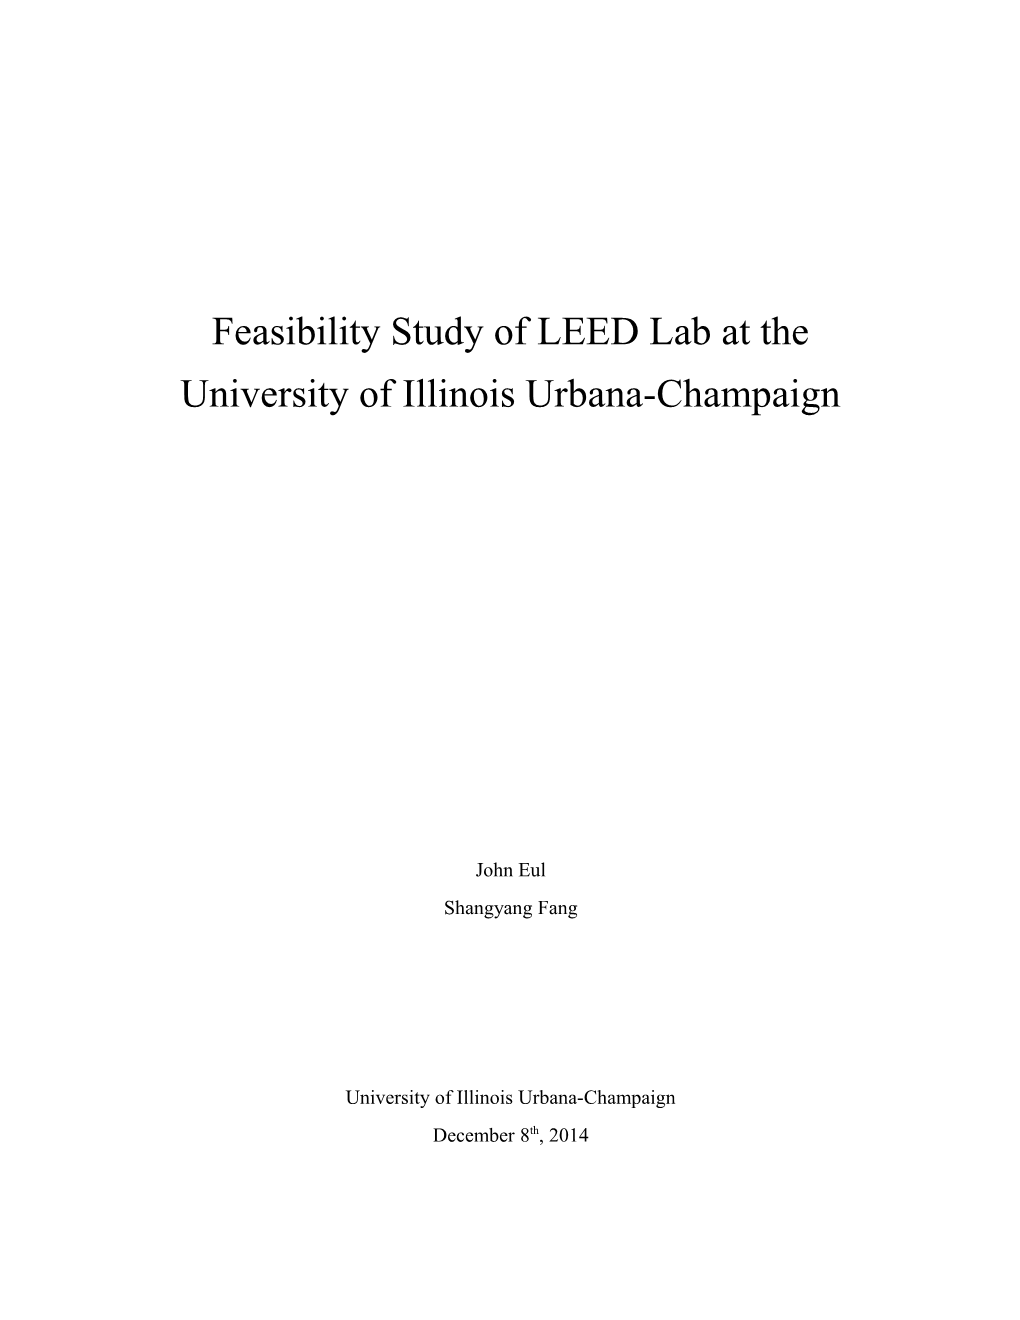 Feasibility Study of LEED Lab at The